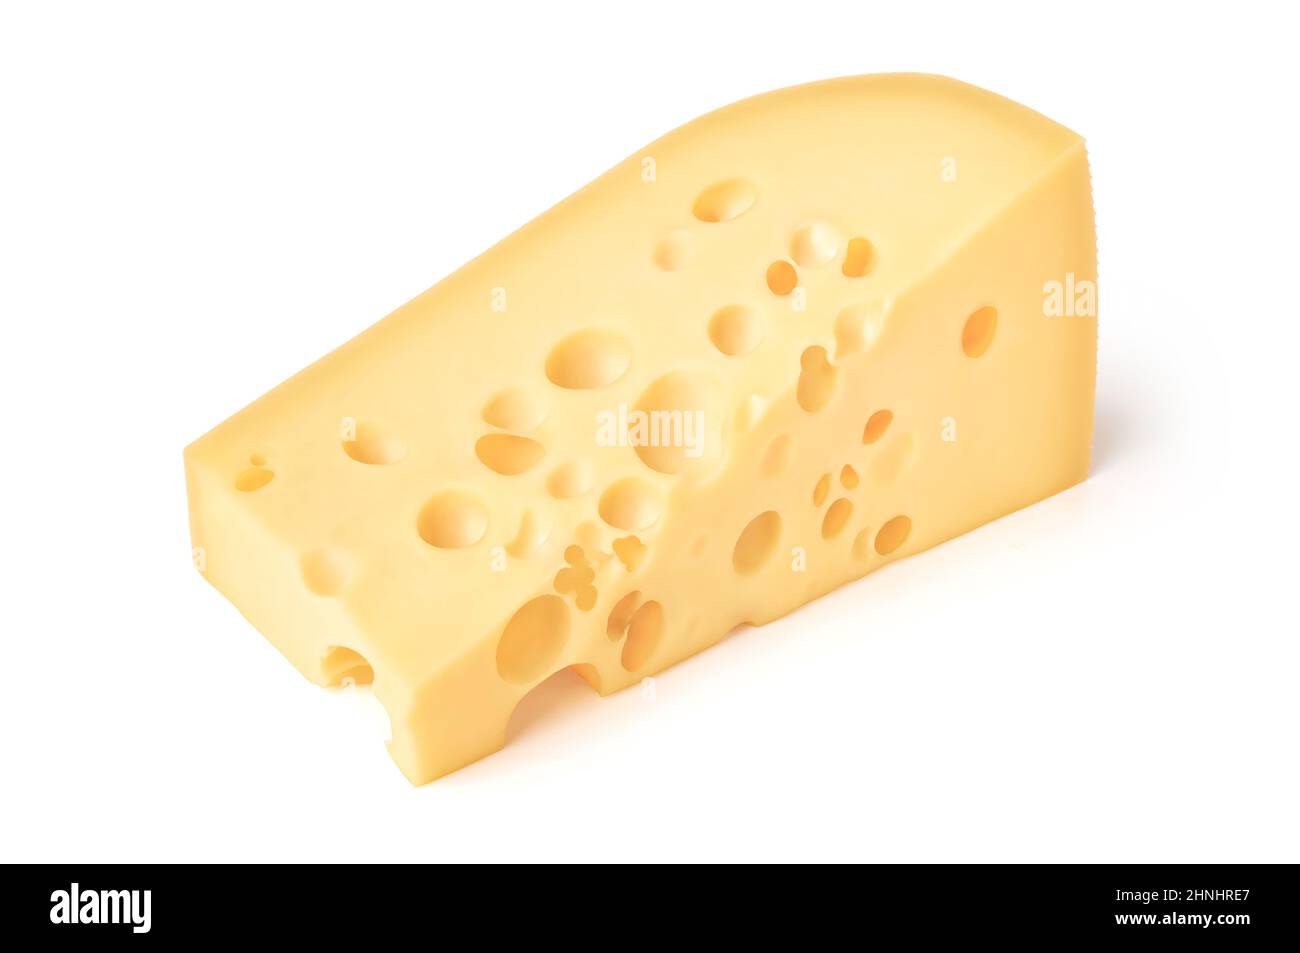 Food and drink: triangular piece of cheese, isolated on white background Stock Photo